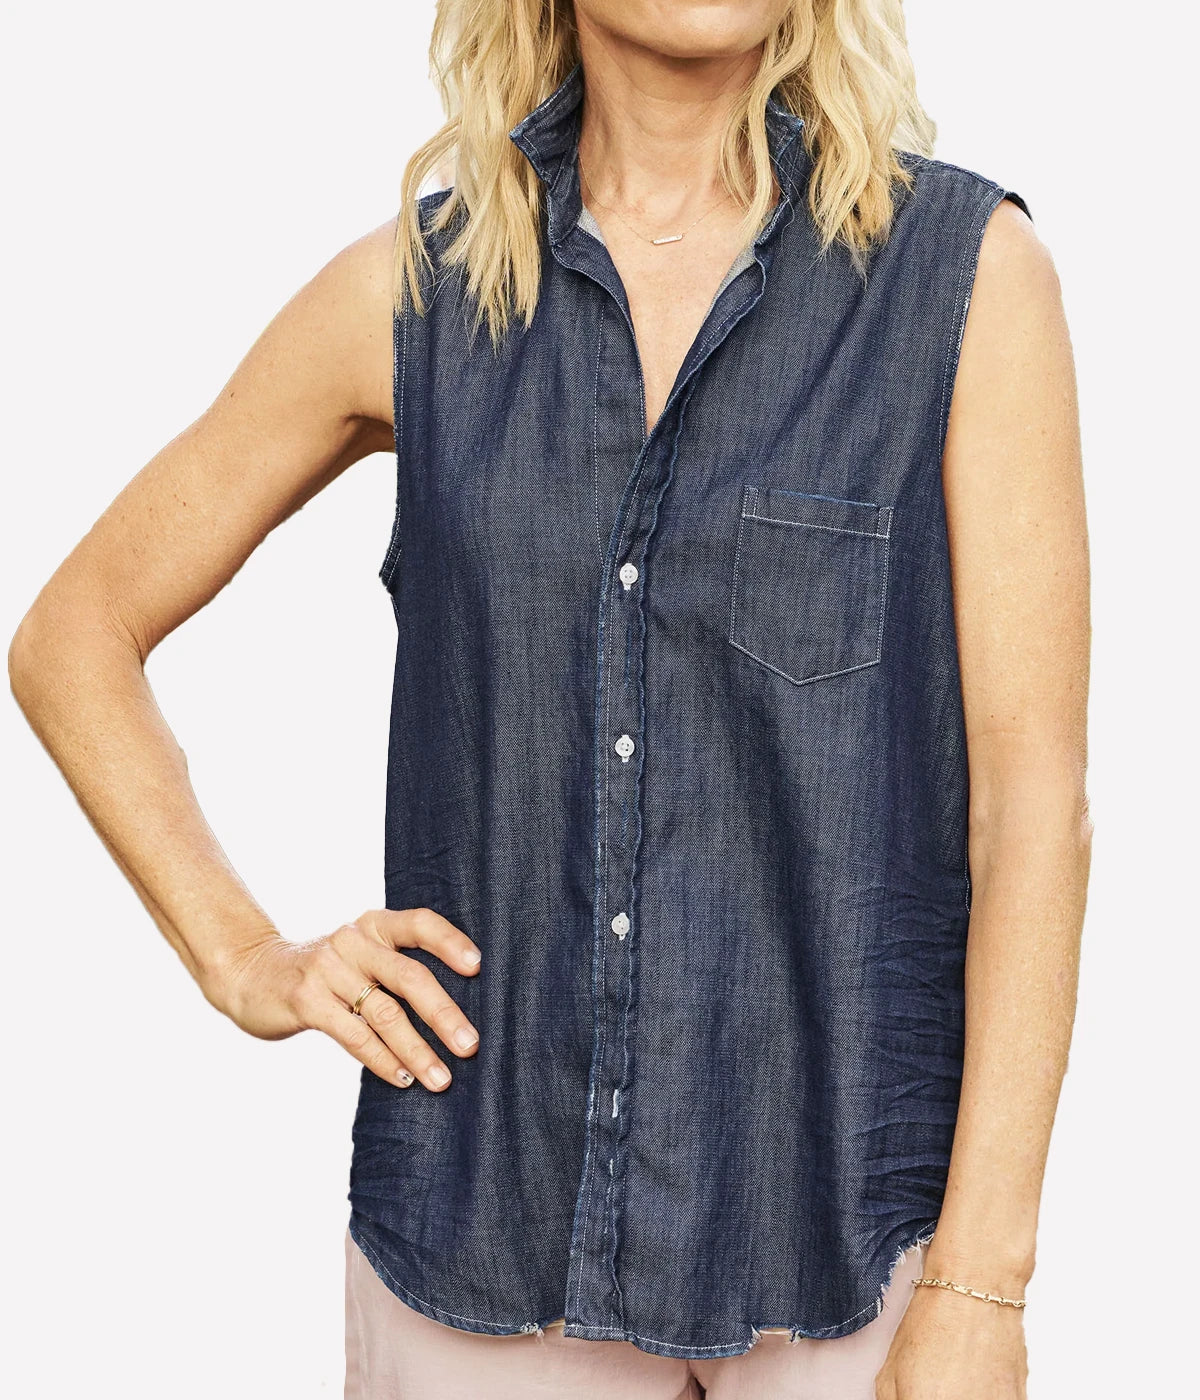 Fiona Woven Button Up in Distressed Rinsed Denim